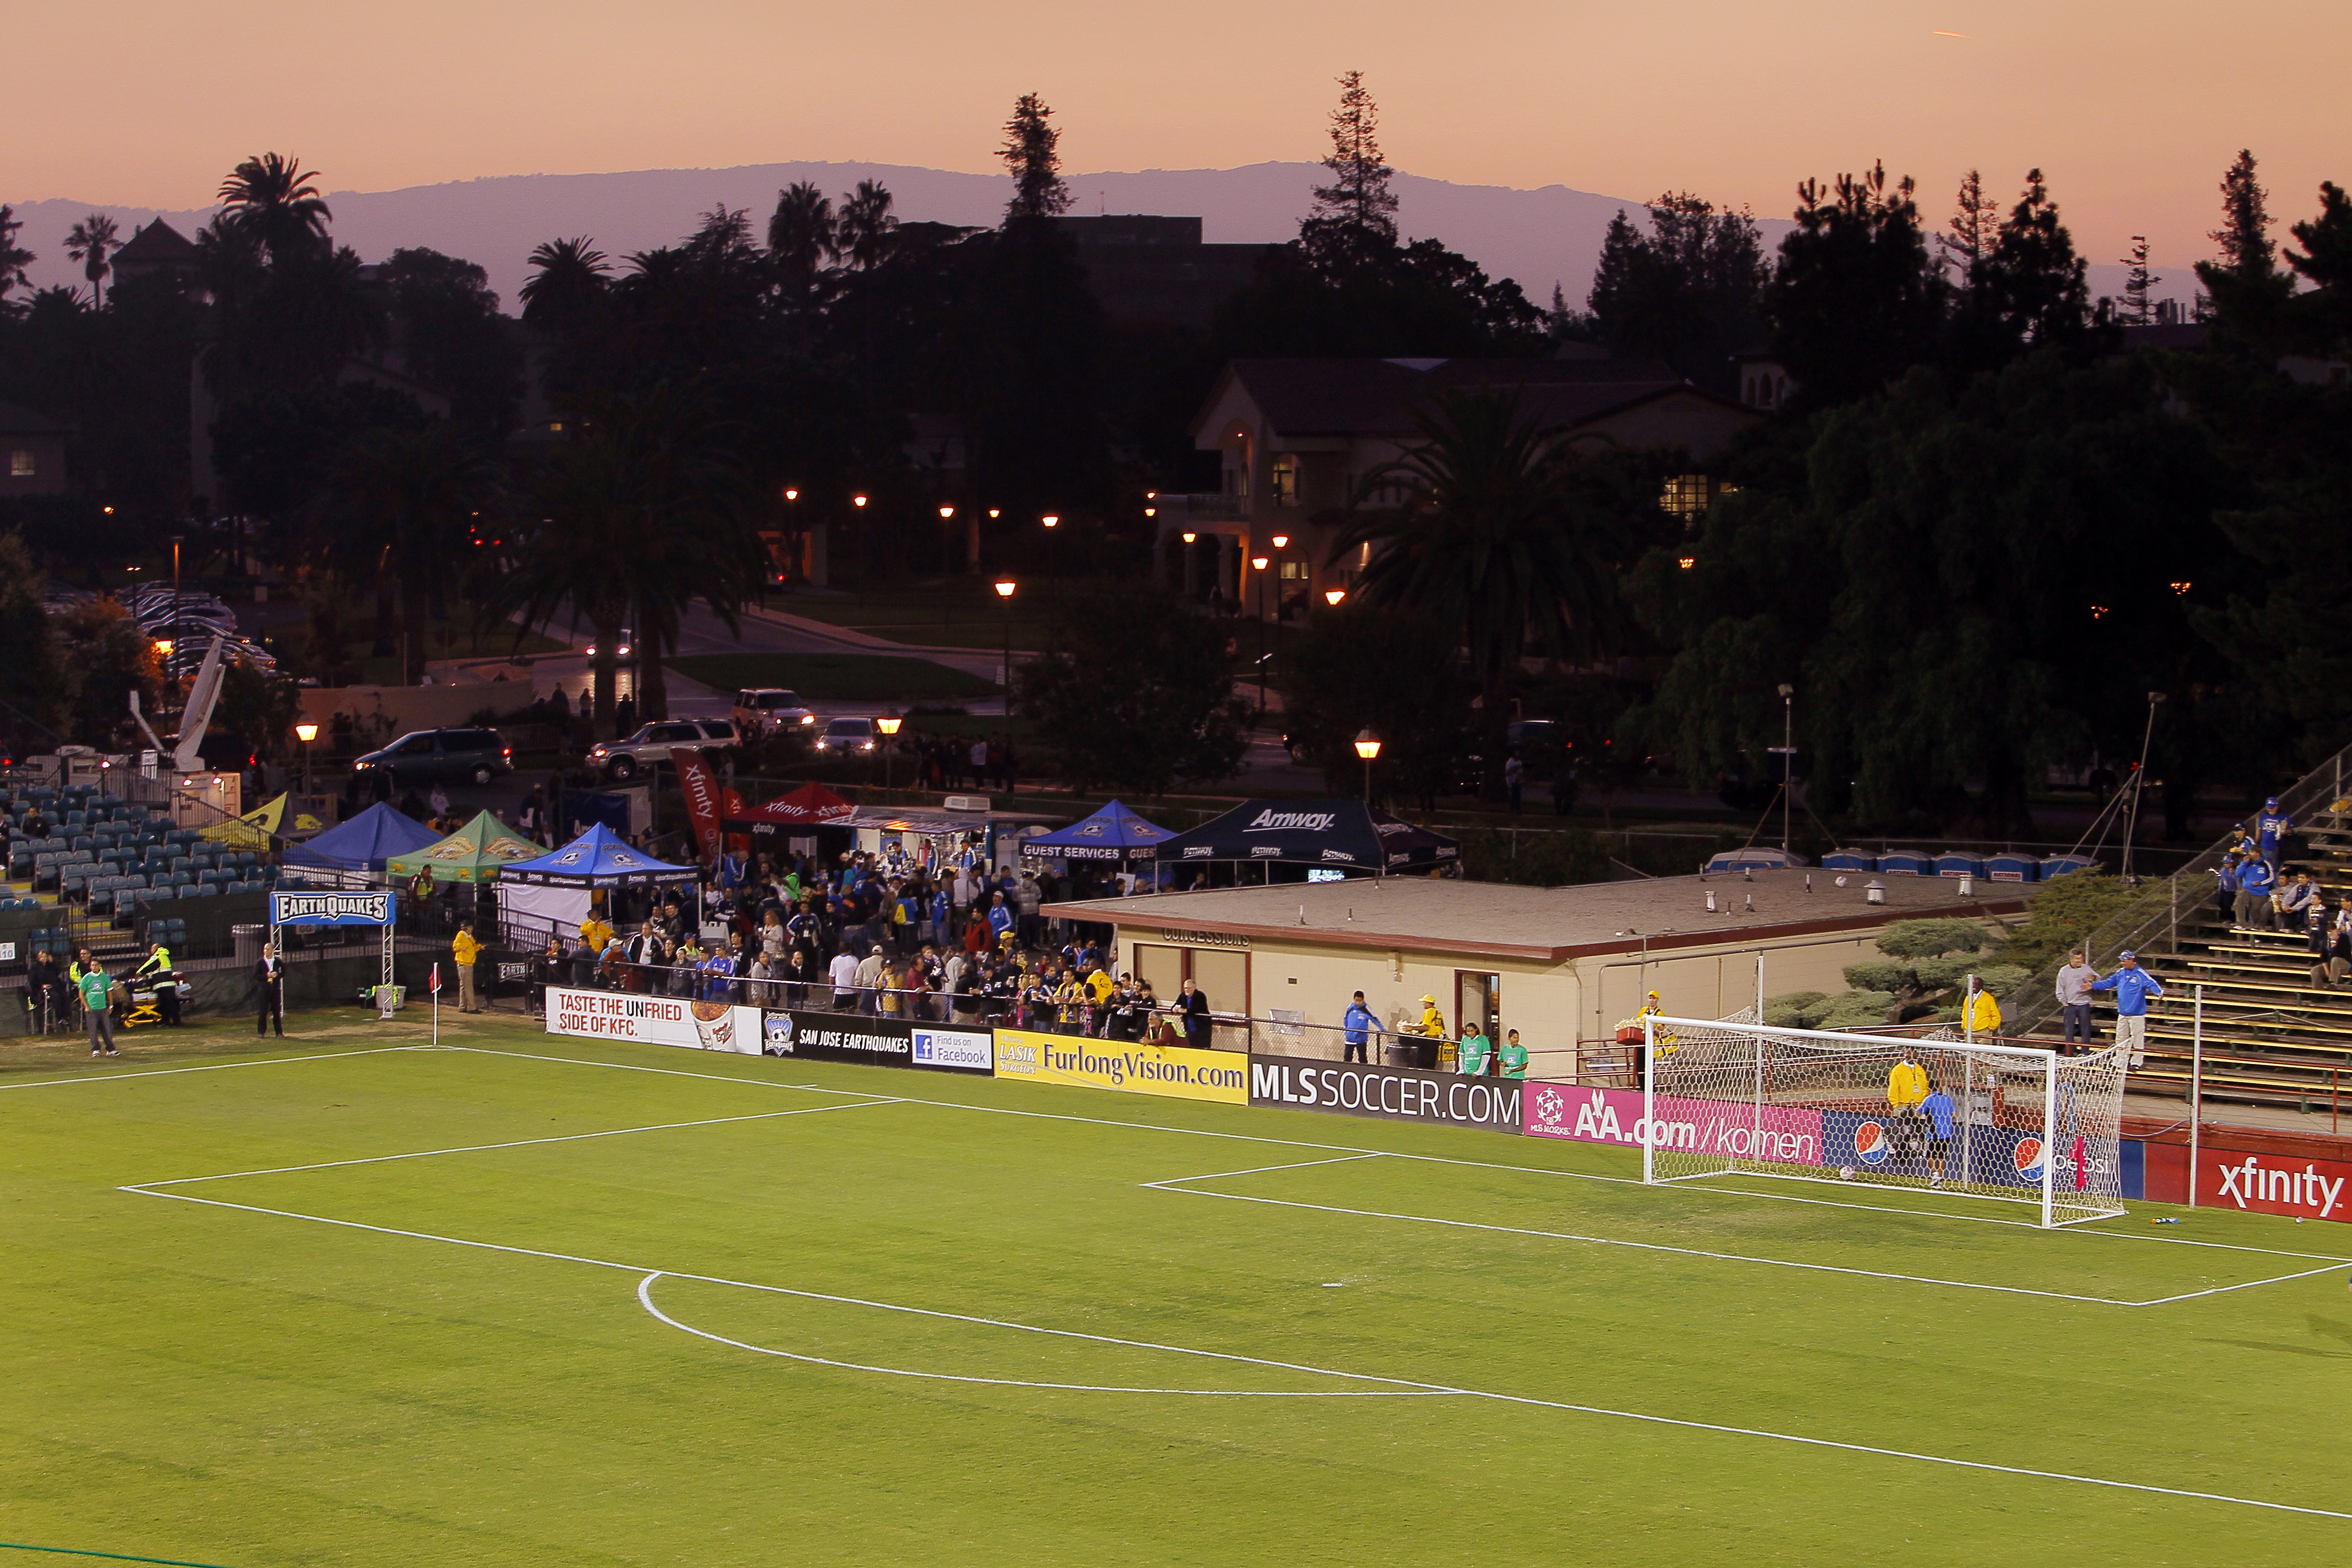 SANTA CLARA, CA - OCTOBER 20:  The sun sets over Buck Shaw Stadium before a game between the San Jose Earthquakes and Chivas USA on October 20, 2010 at Buck Shaw Stadium in Santa Clara, California.  The Earthquakes won 3-0. (Photo by Brian Bahr/Getty Imag